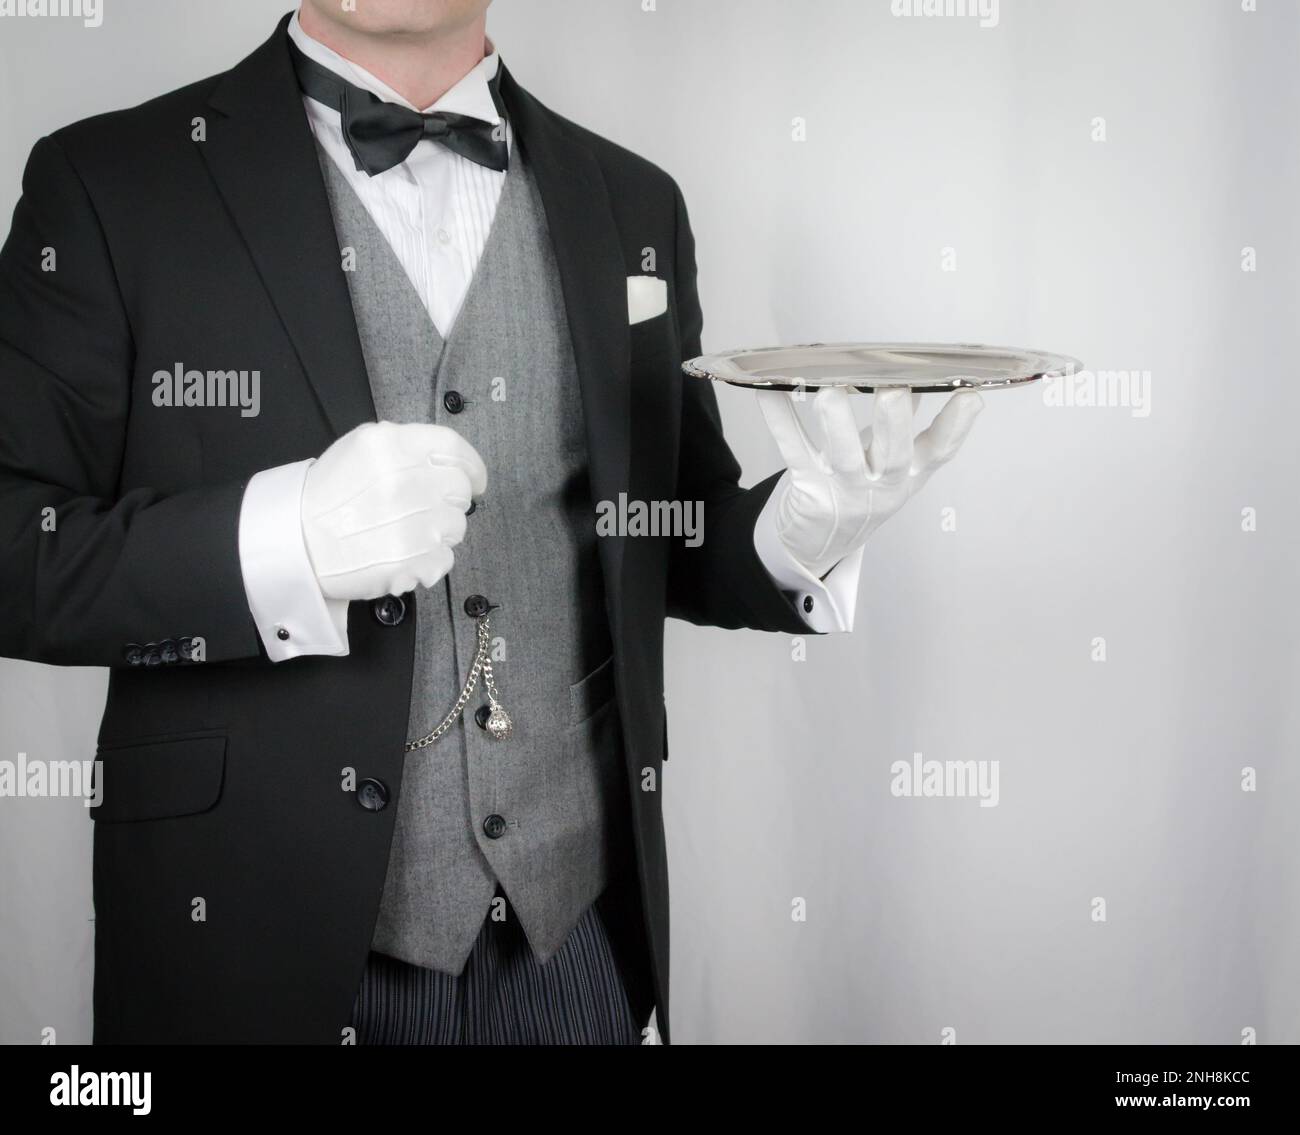 Portrait of Butler or Waiter in Dark Formal Suit Holding Silver Tray. Concept of Service Industry and Professional Hospitality. Stock Photo